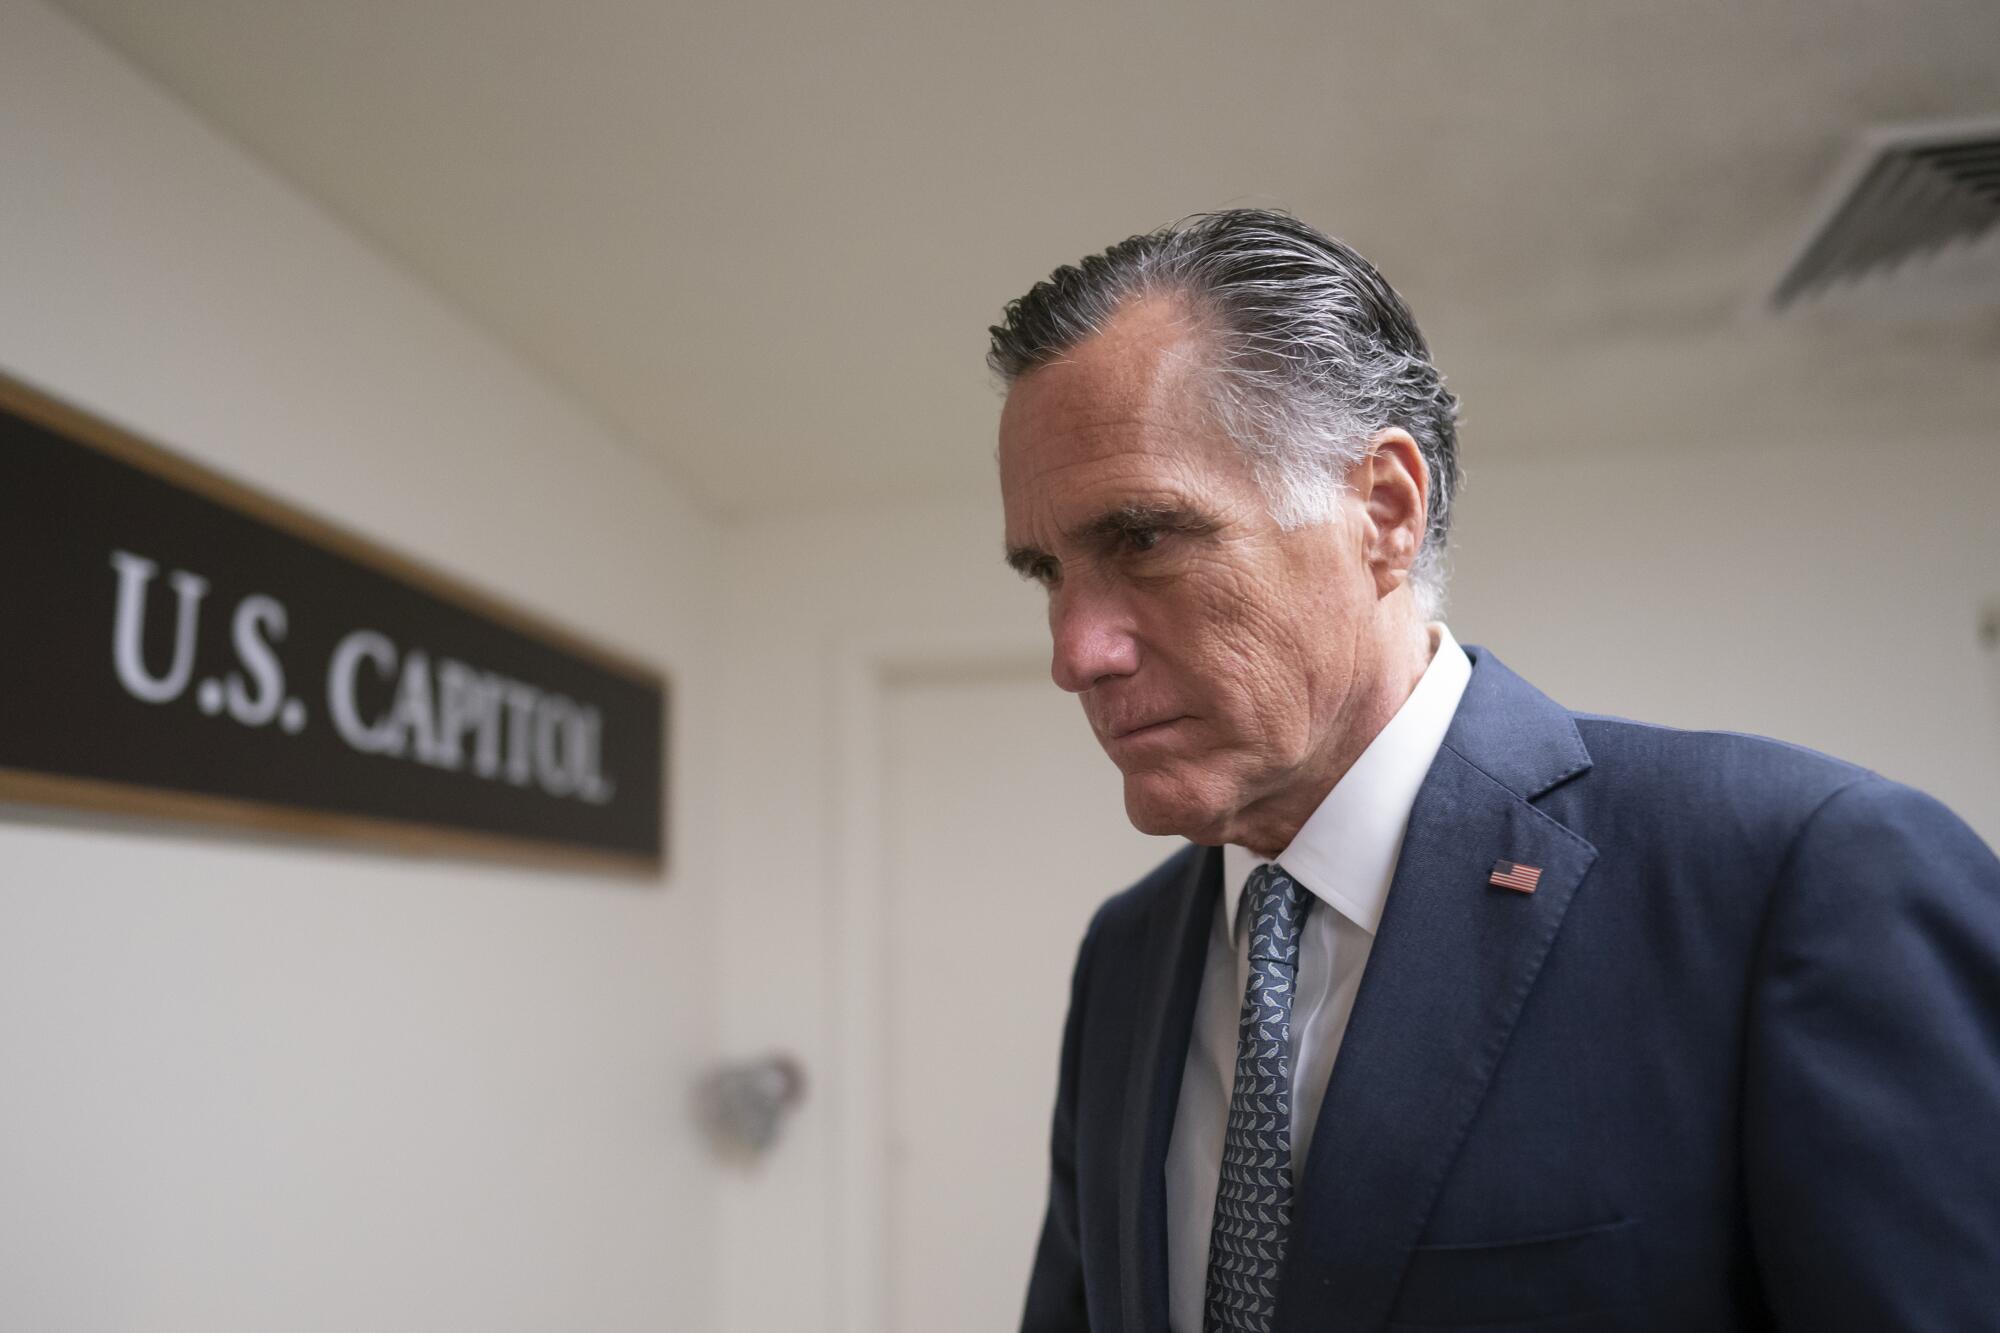 Mitt Romney, wearing a dark suit and white dress shirt, walks past a sign that reads "U.S. Capitol."